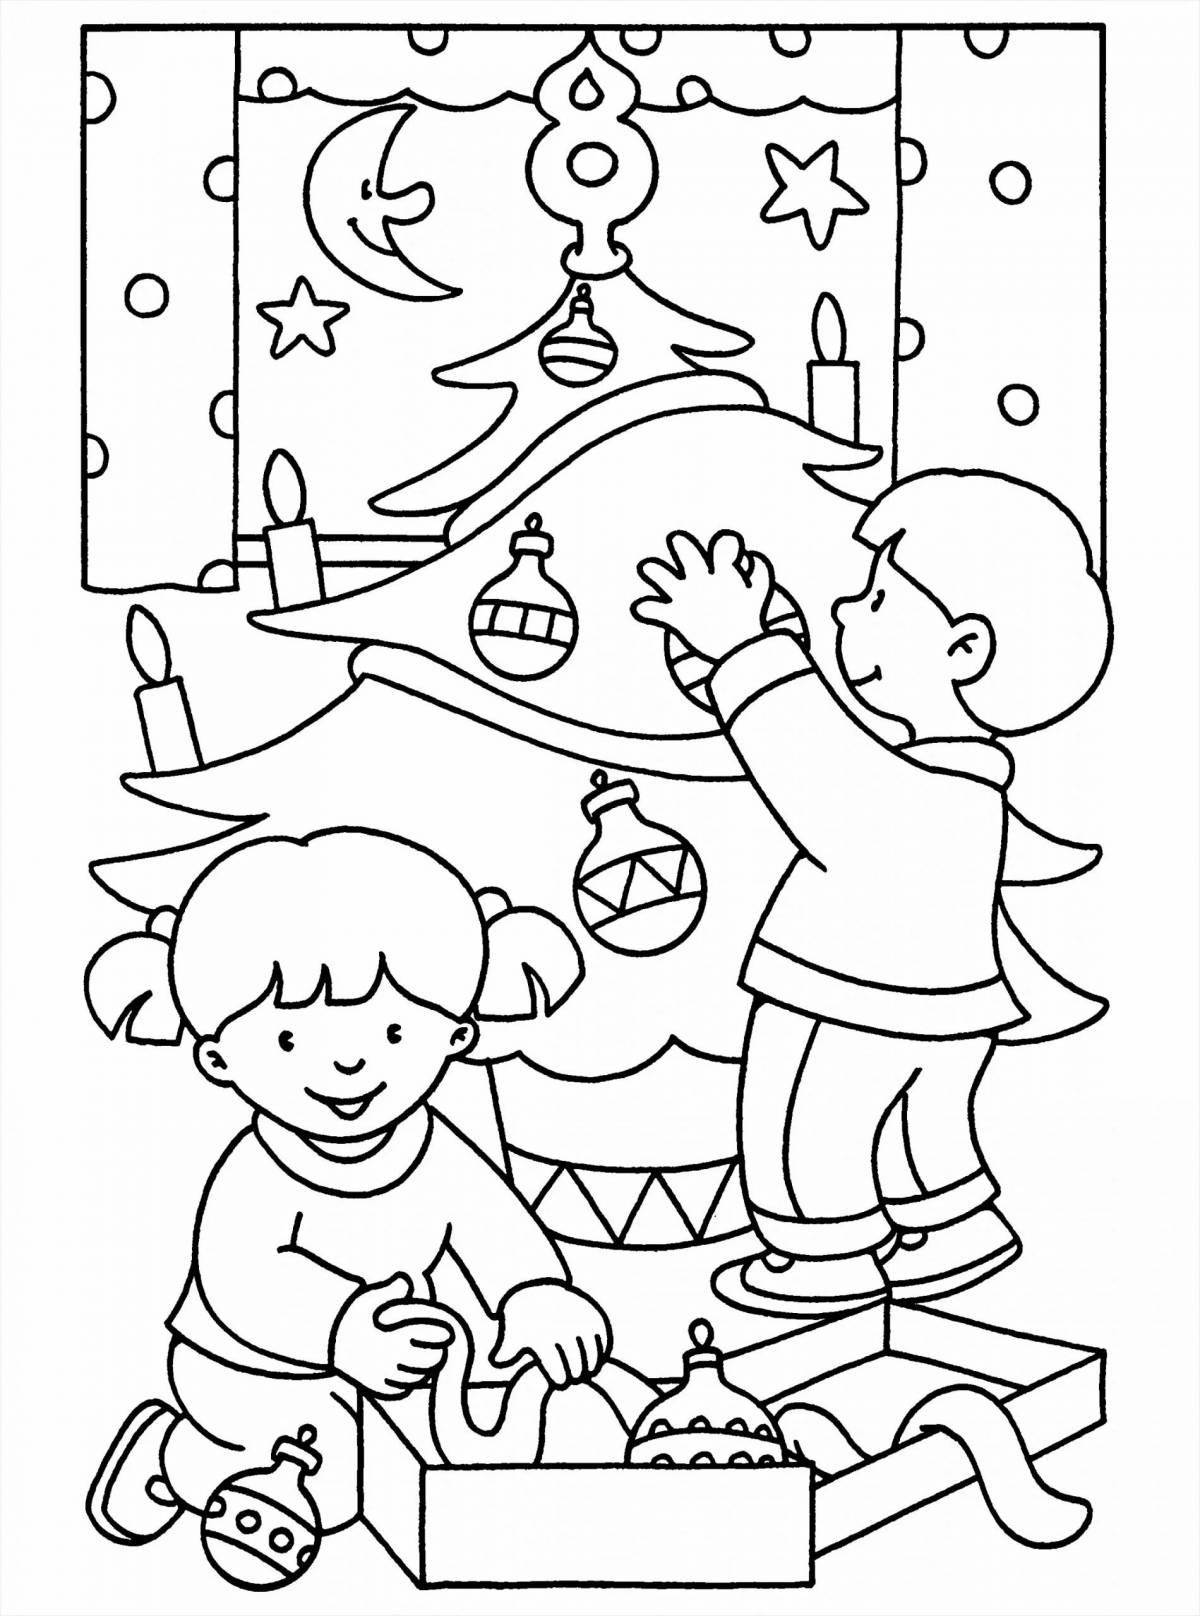 Shiny Christmas coloring book for kids